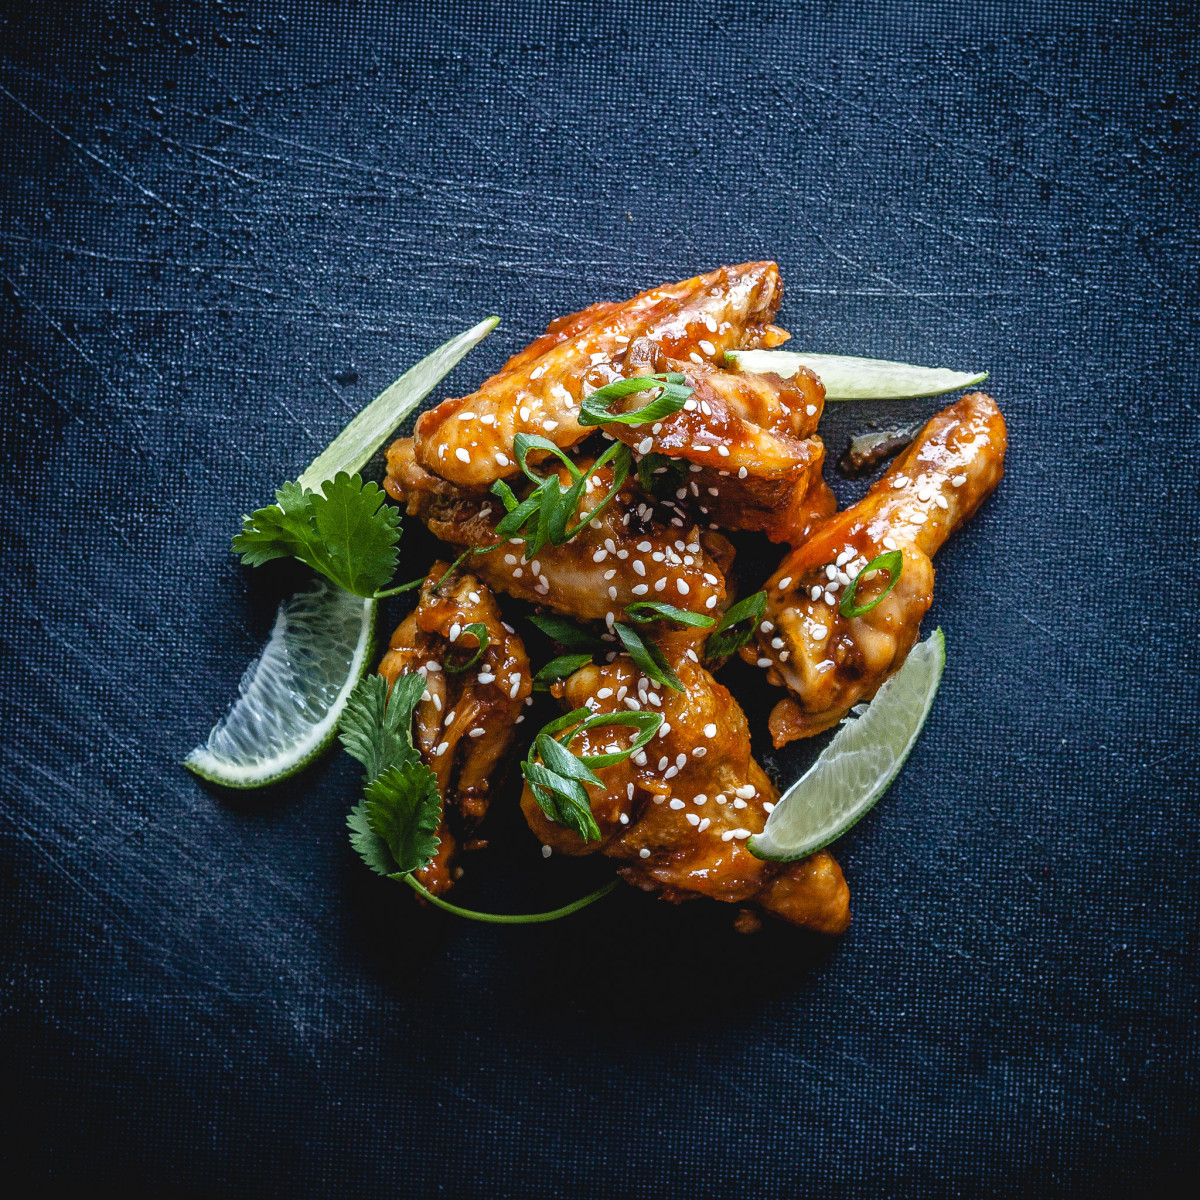 The Wings of Change! Miso Glaze. Game On!